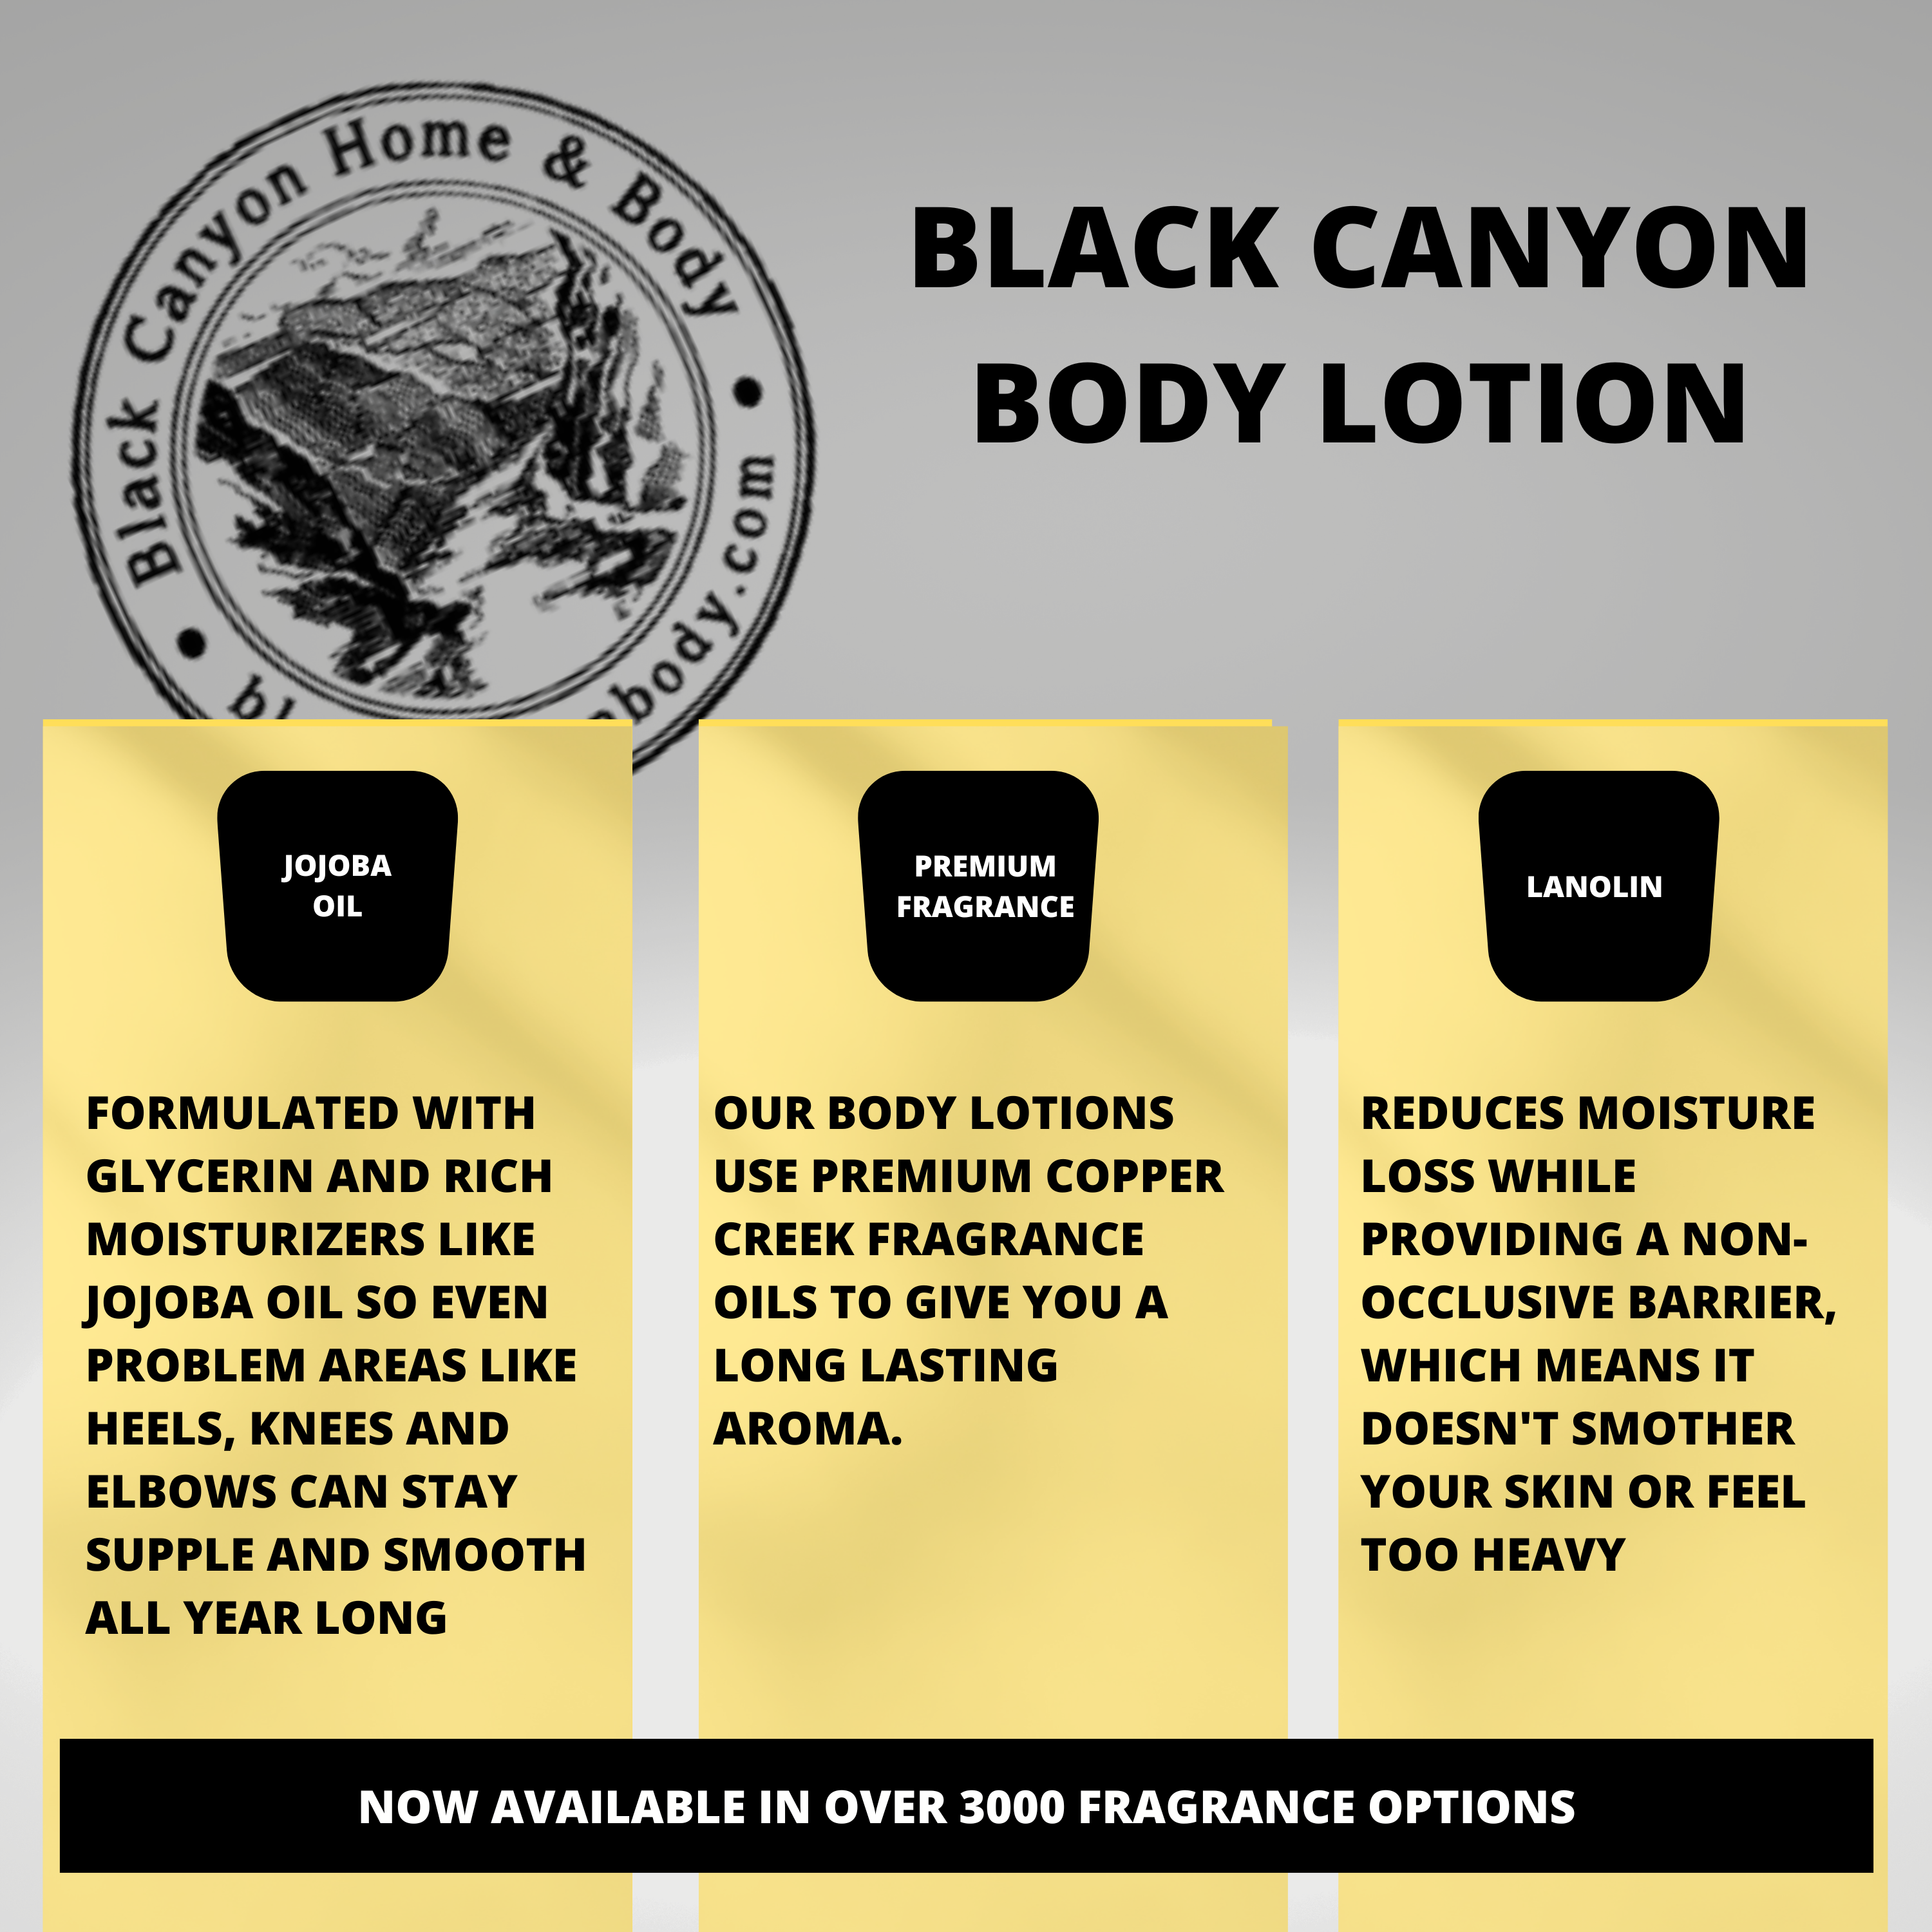 Black Canyon Butt Naked Scented Luxury Body Lotion with Lanolin and Jojoba Oil